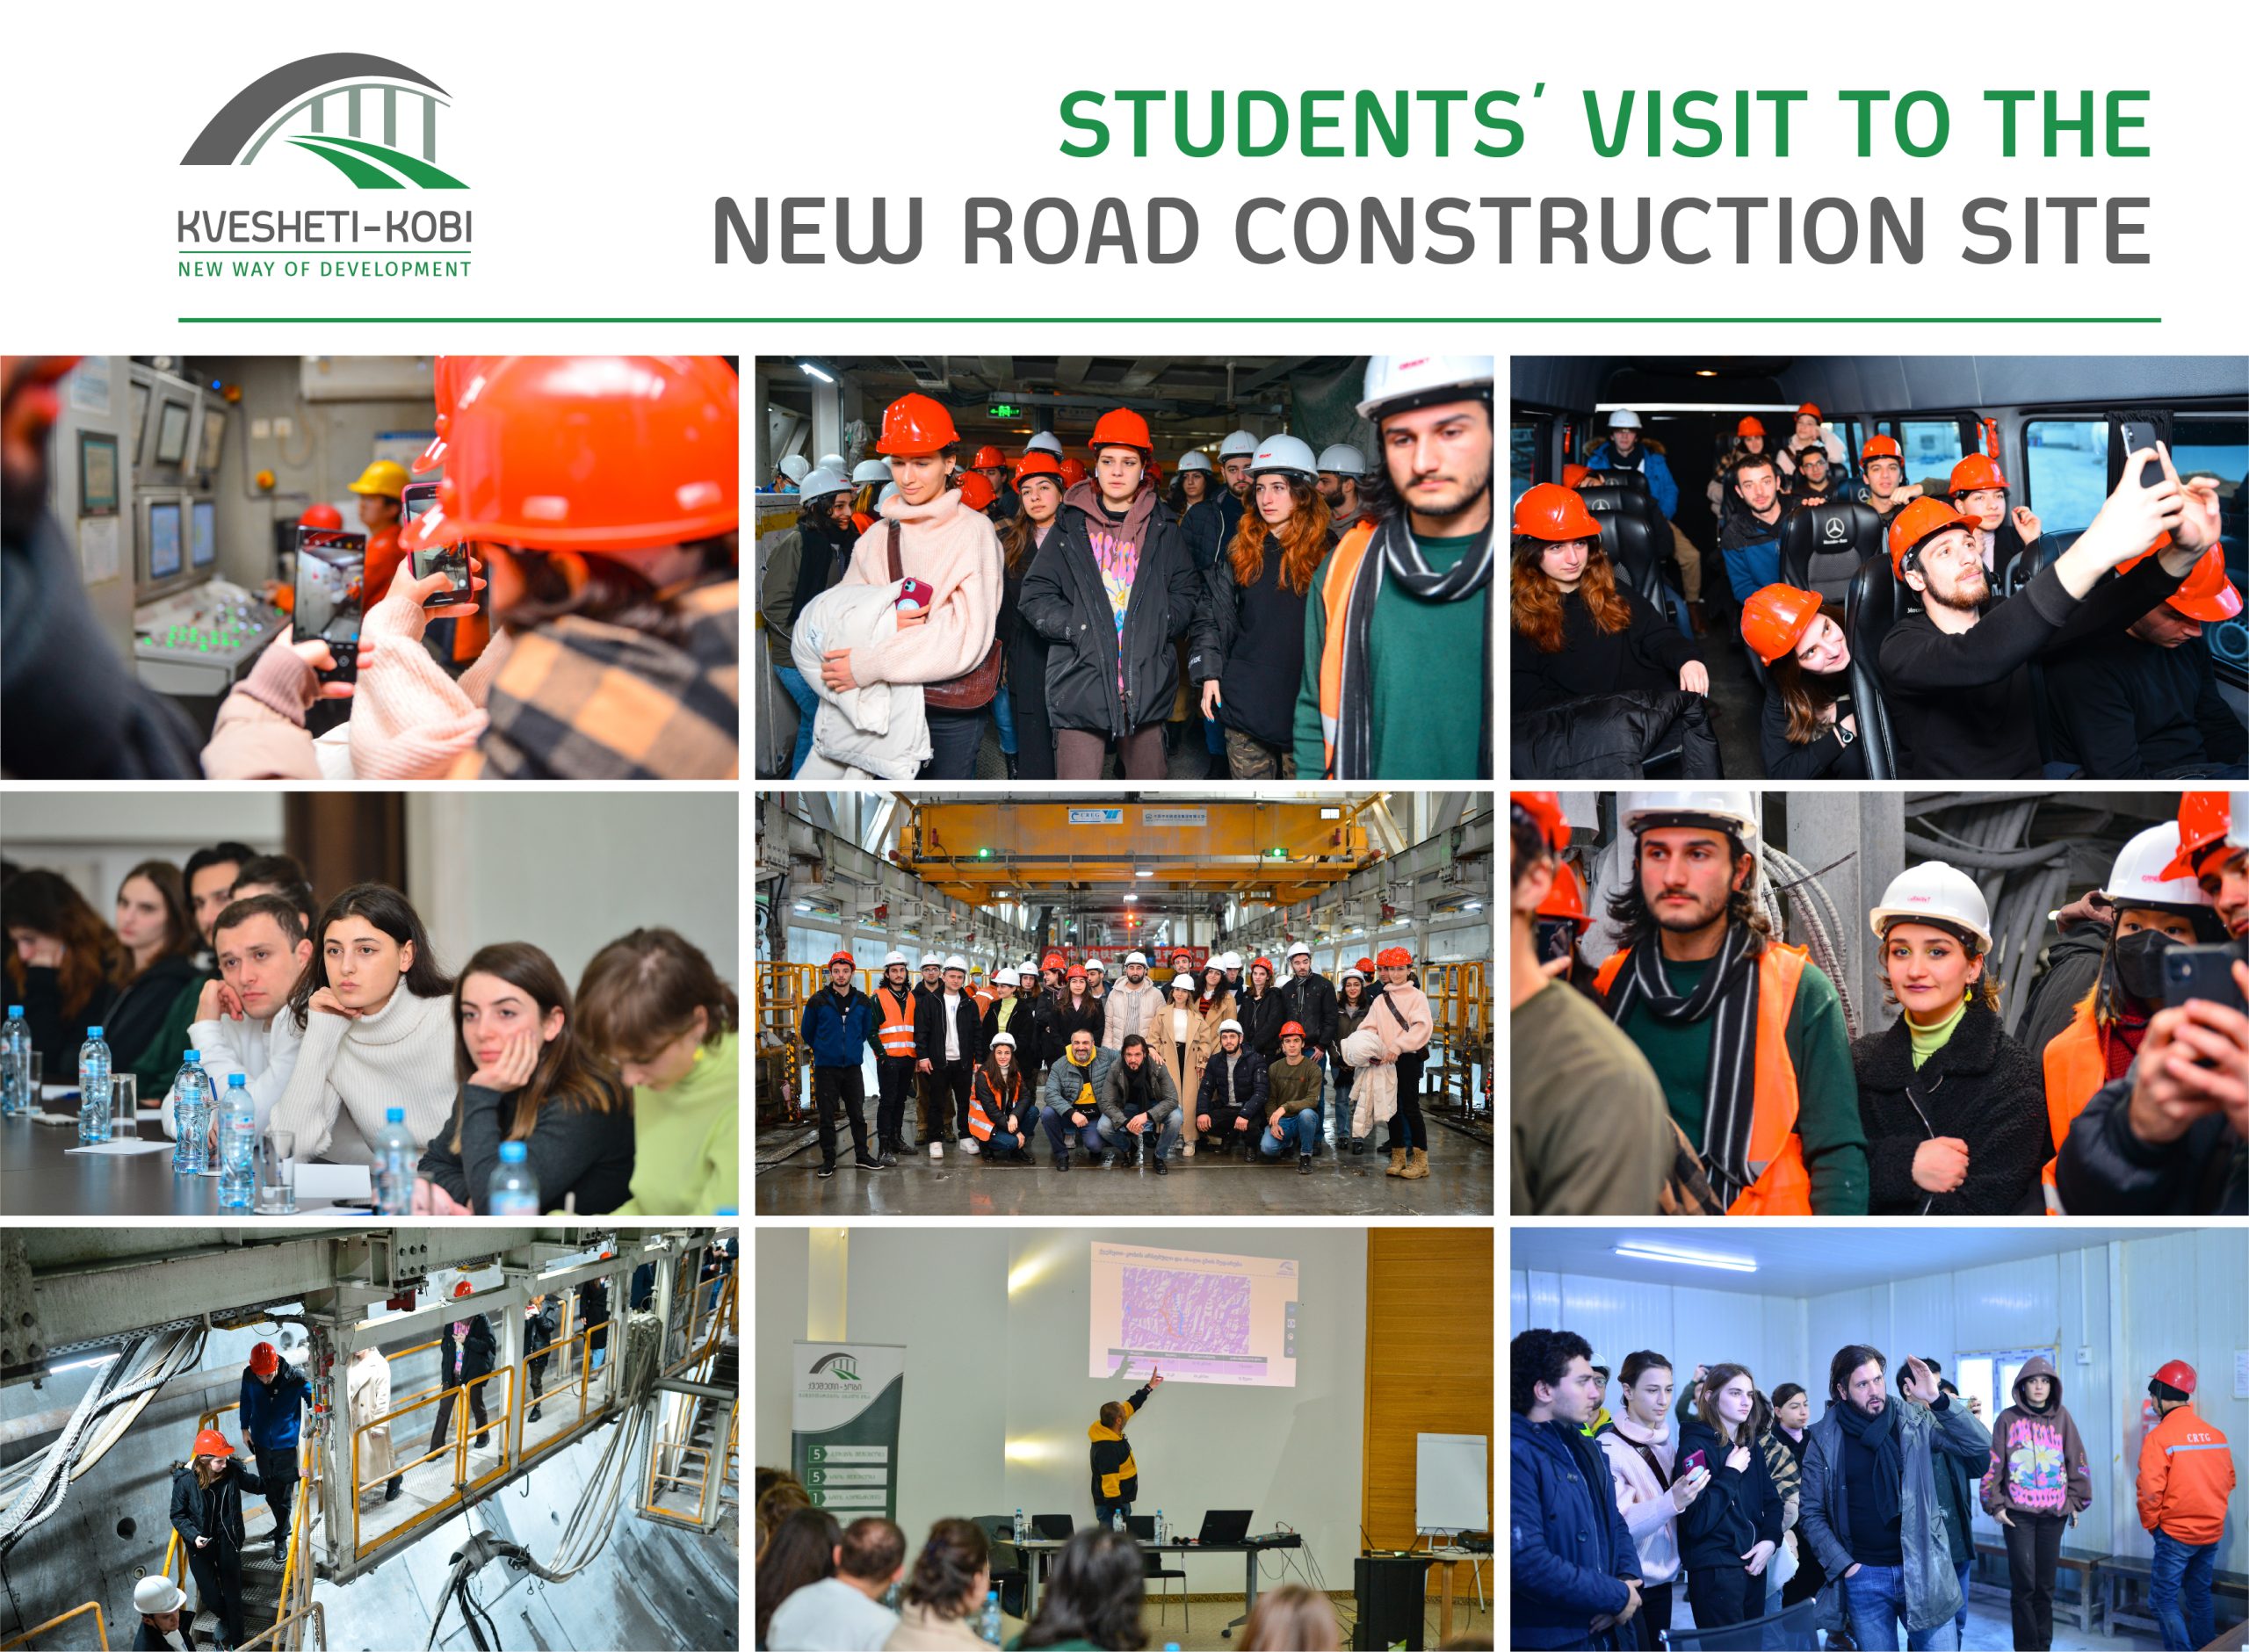 Students’ visit to the new road construction site